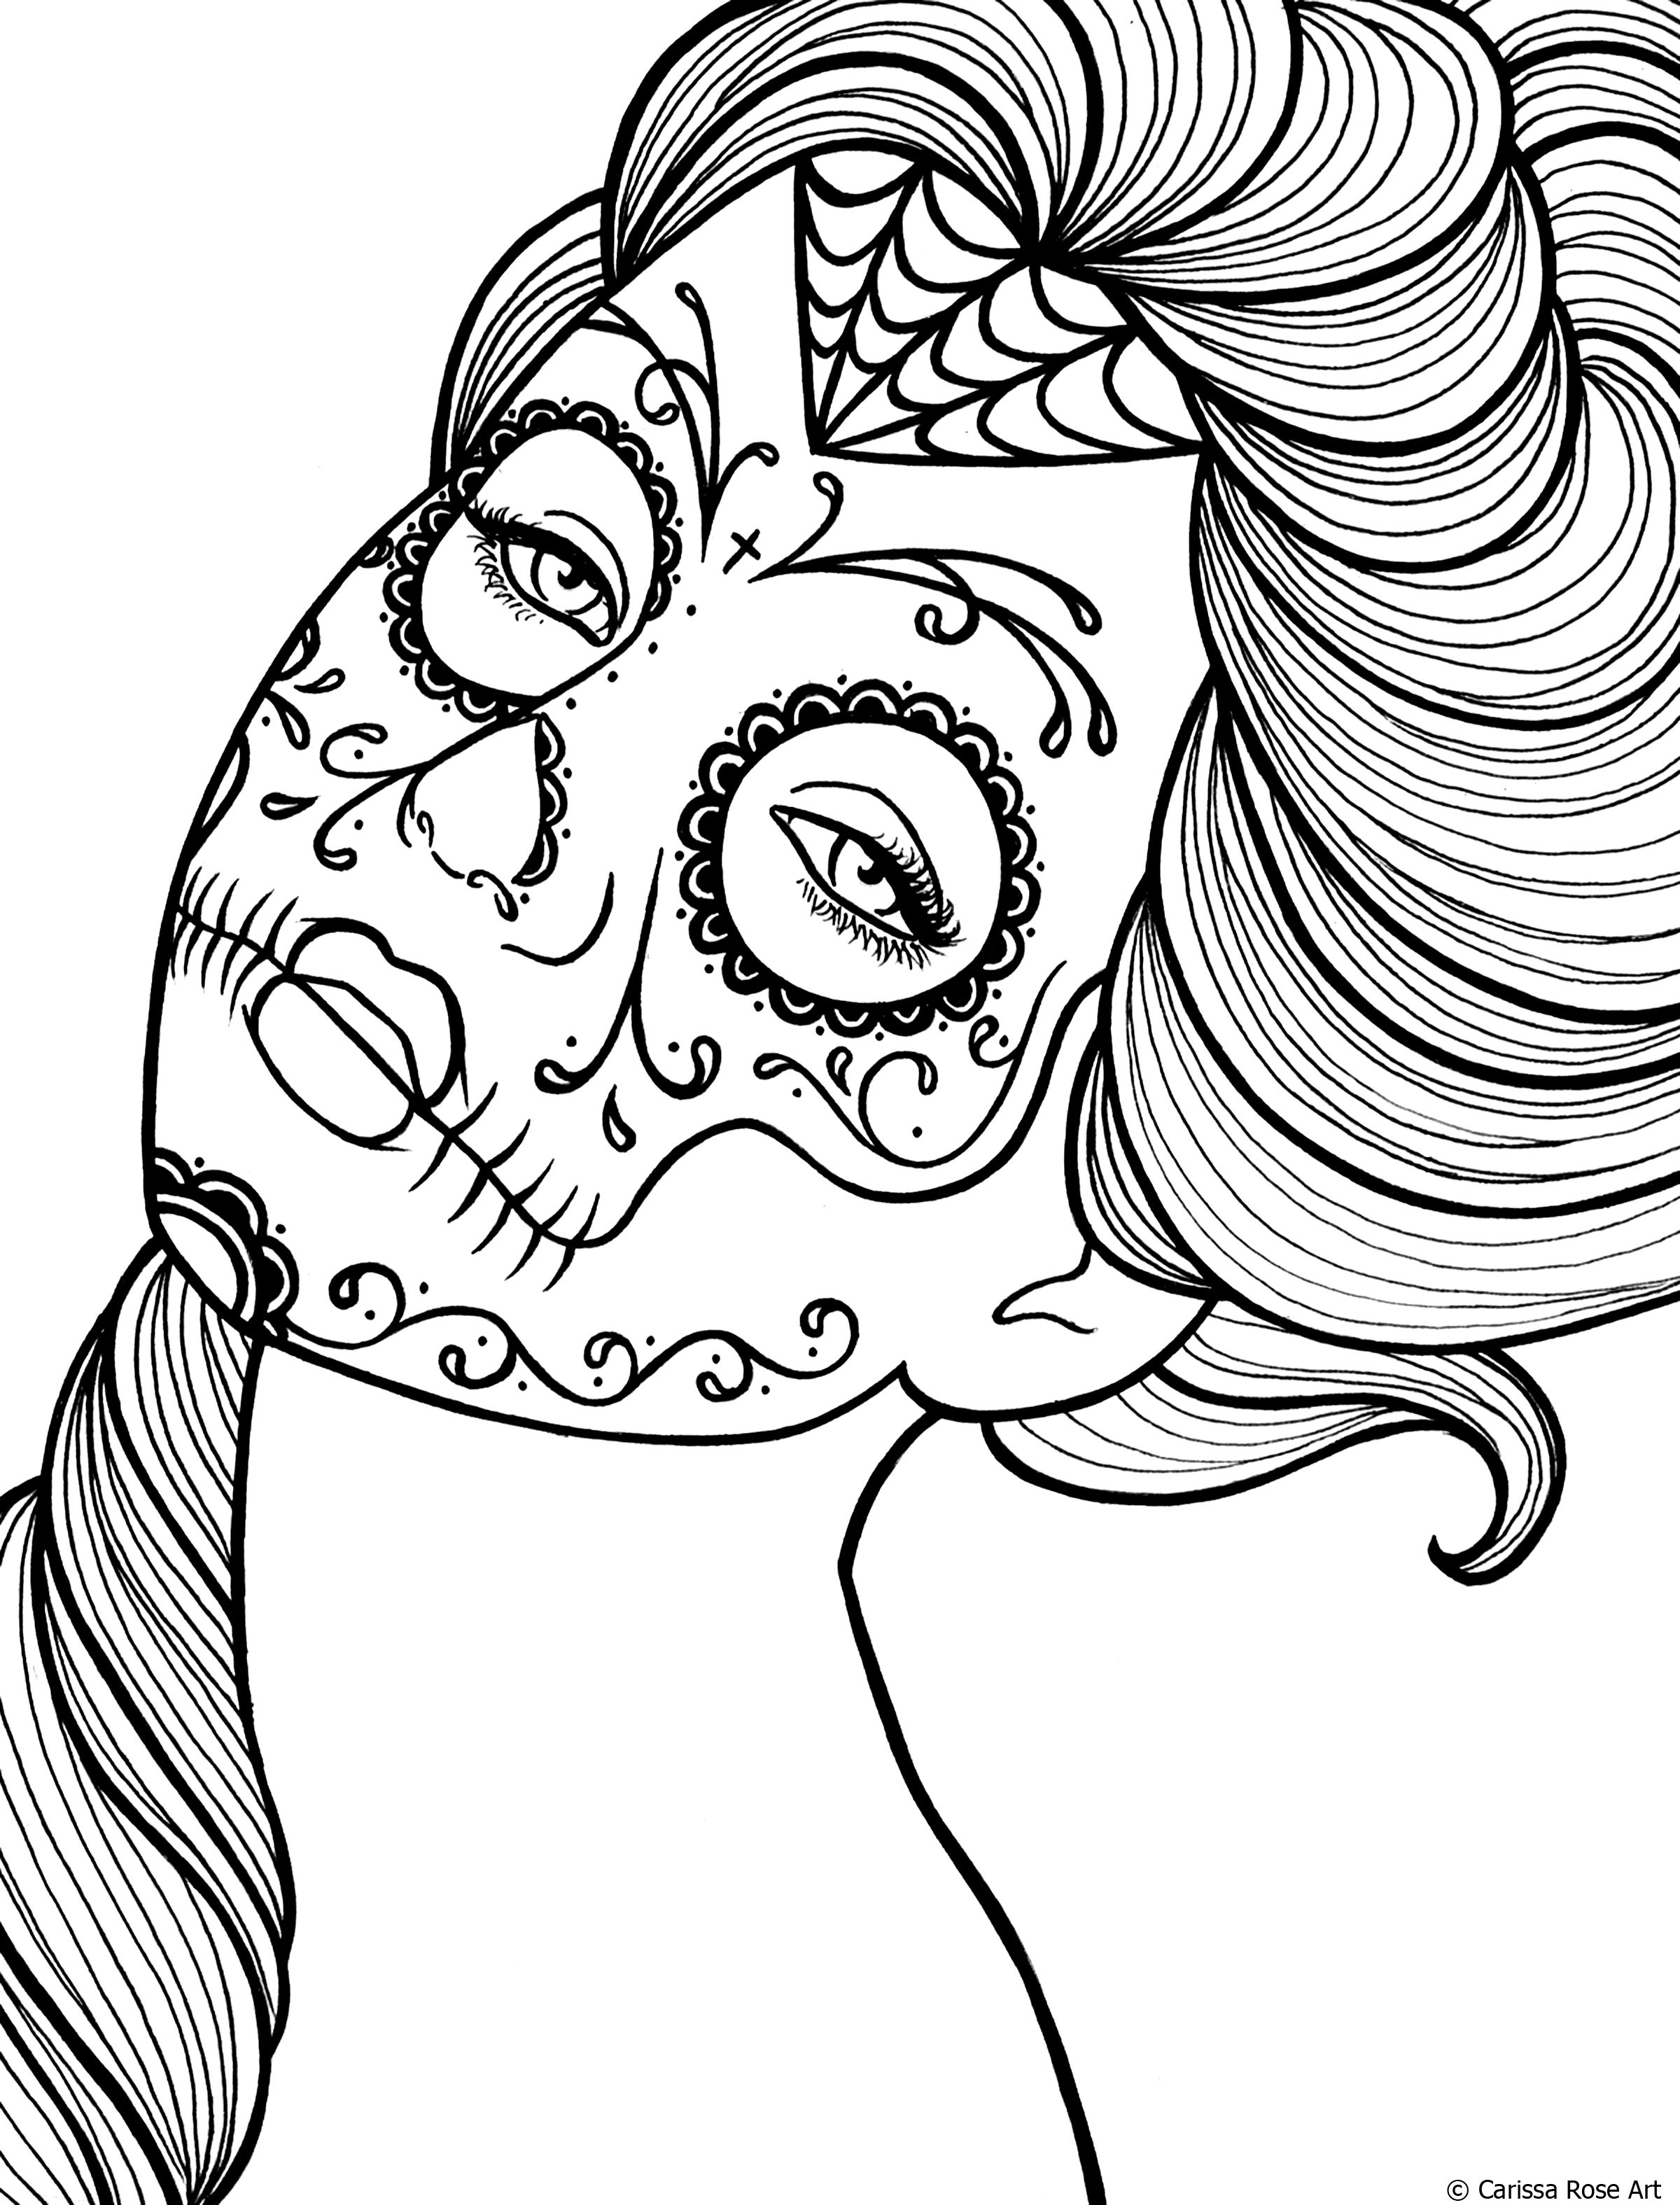 Coloring Pages : Free Printable Day Of The Coloring Book Page - Free Printable Day Of The Dead Coloring Pages